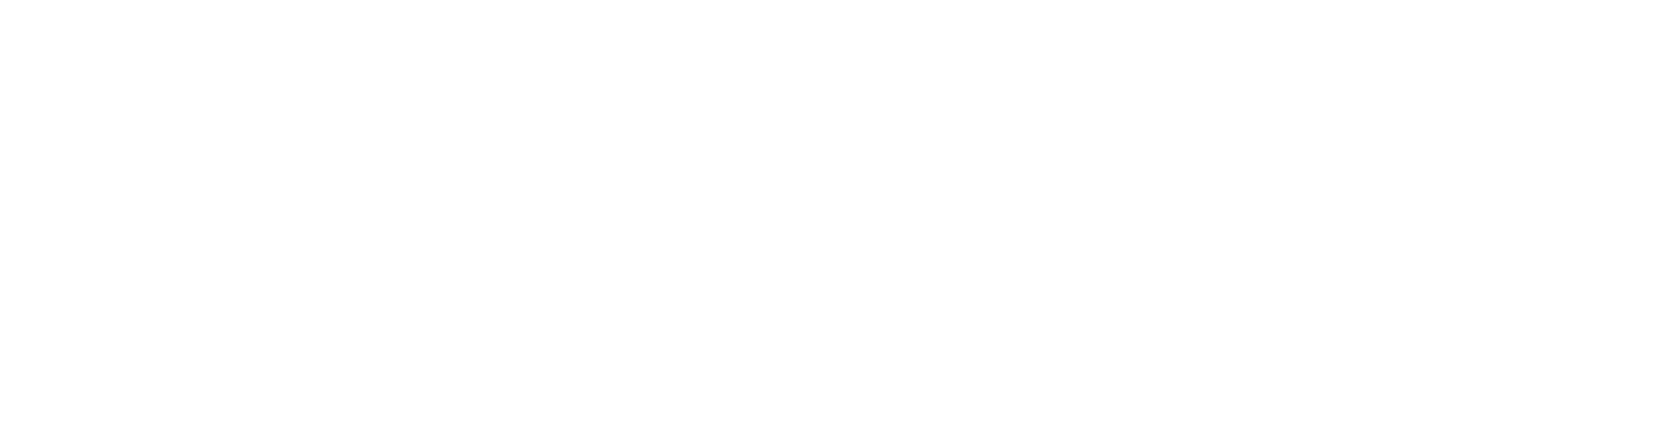 tampere business meet